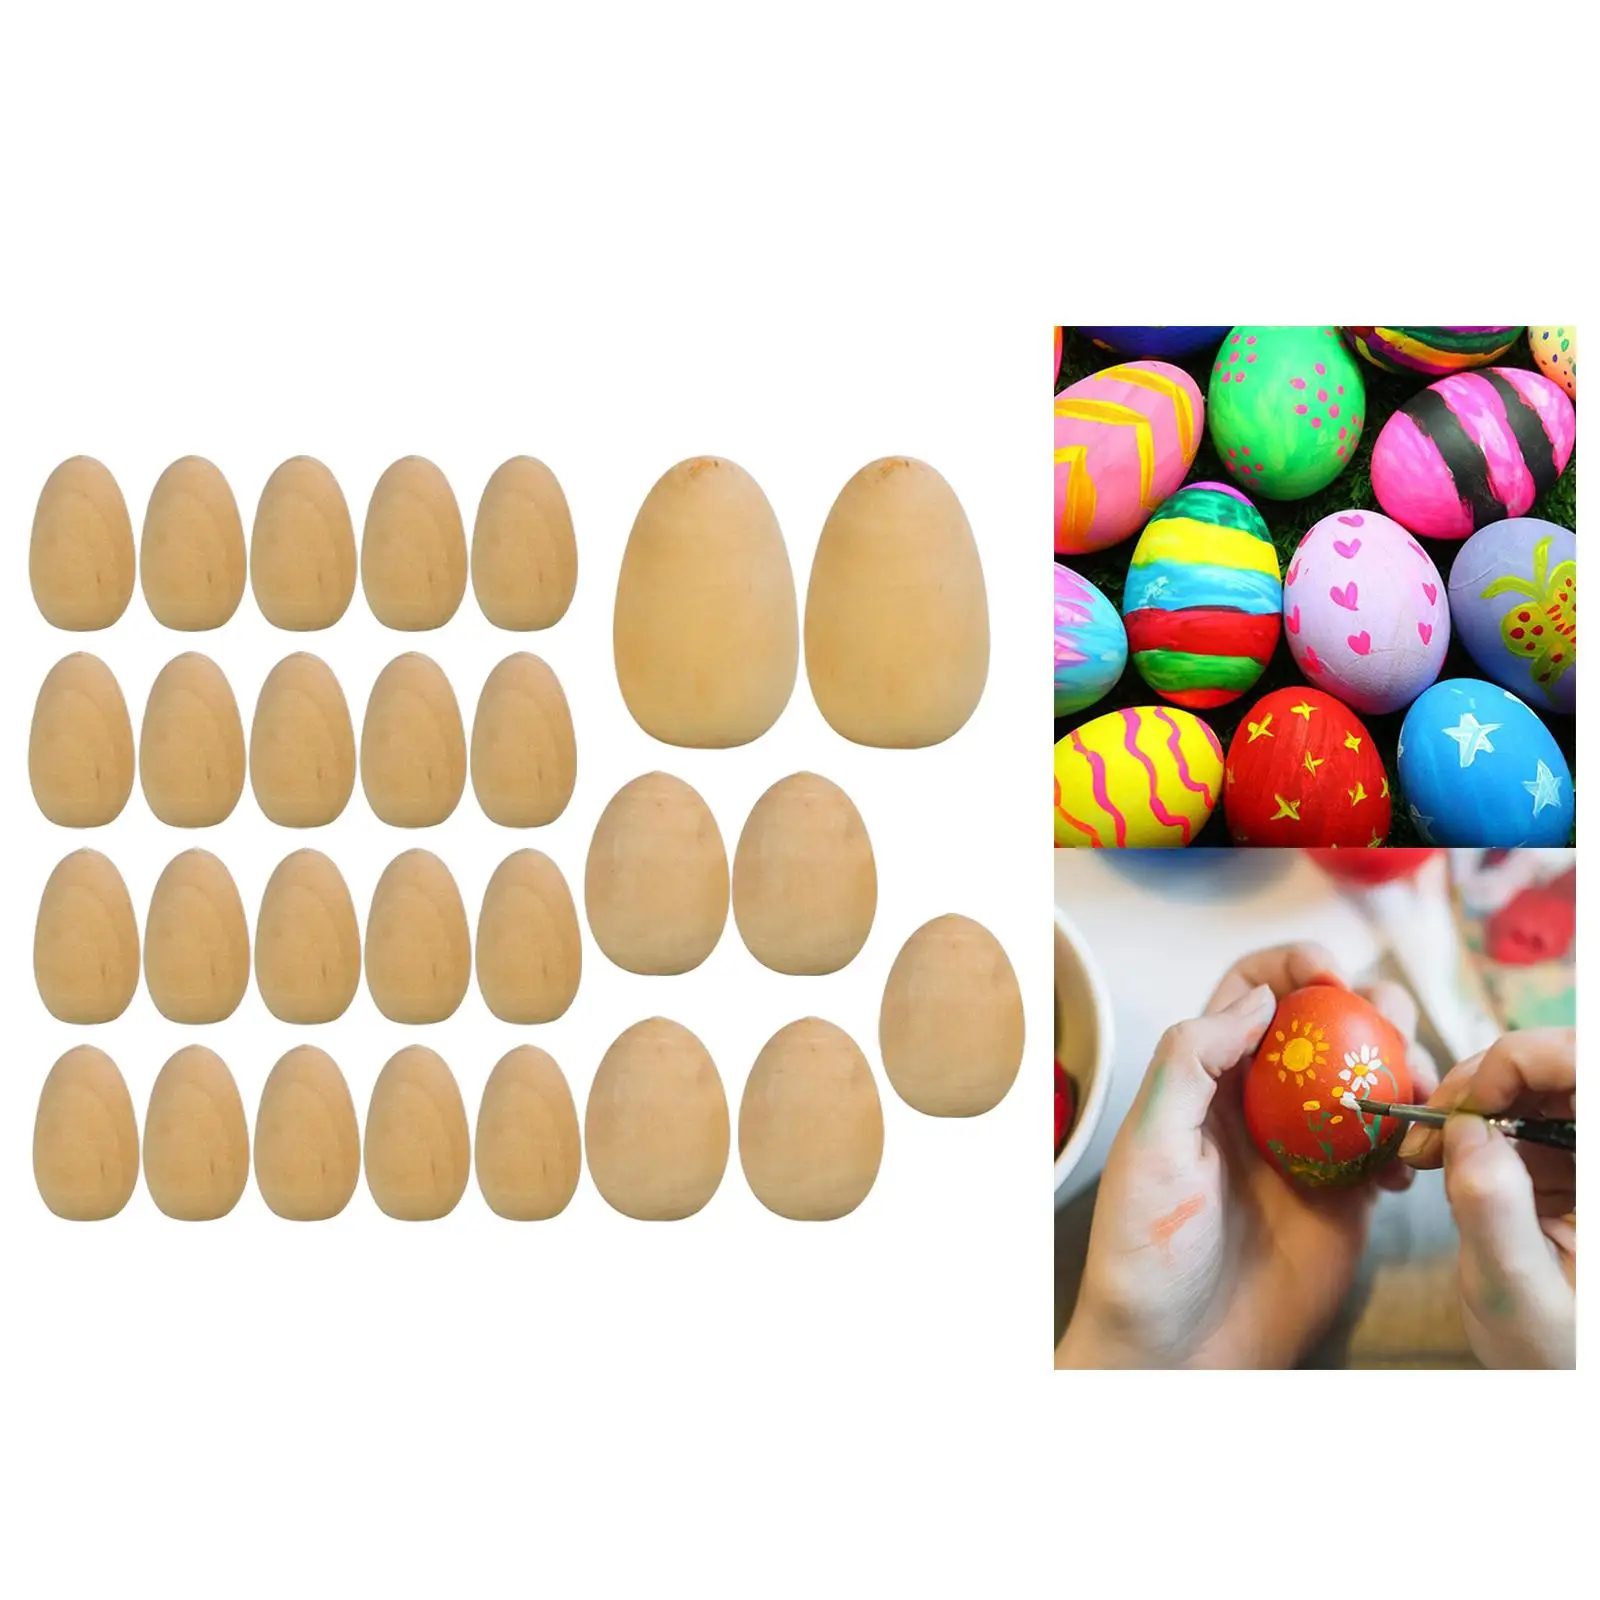 27 Pieces Wooden Blank Eggs Fake Eggs Unfinished Wood Eggs with Flat Bottom for DIY Easter Holiday Craft Ornament